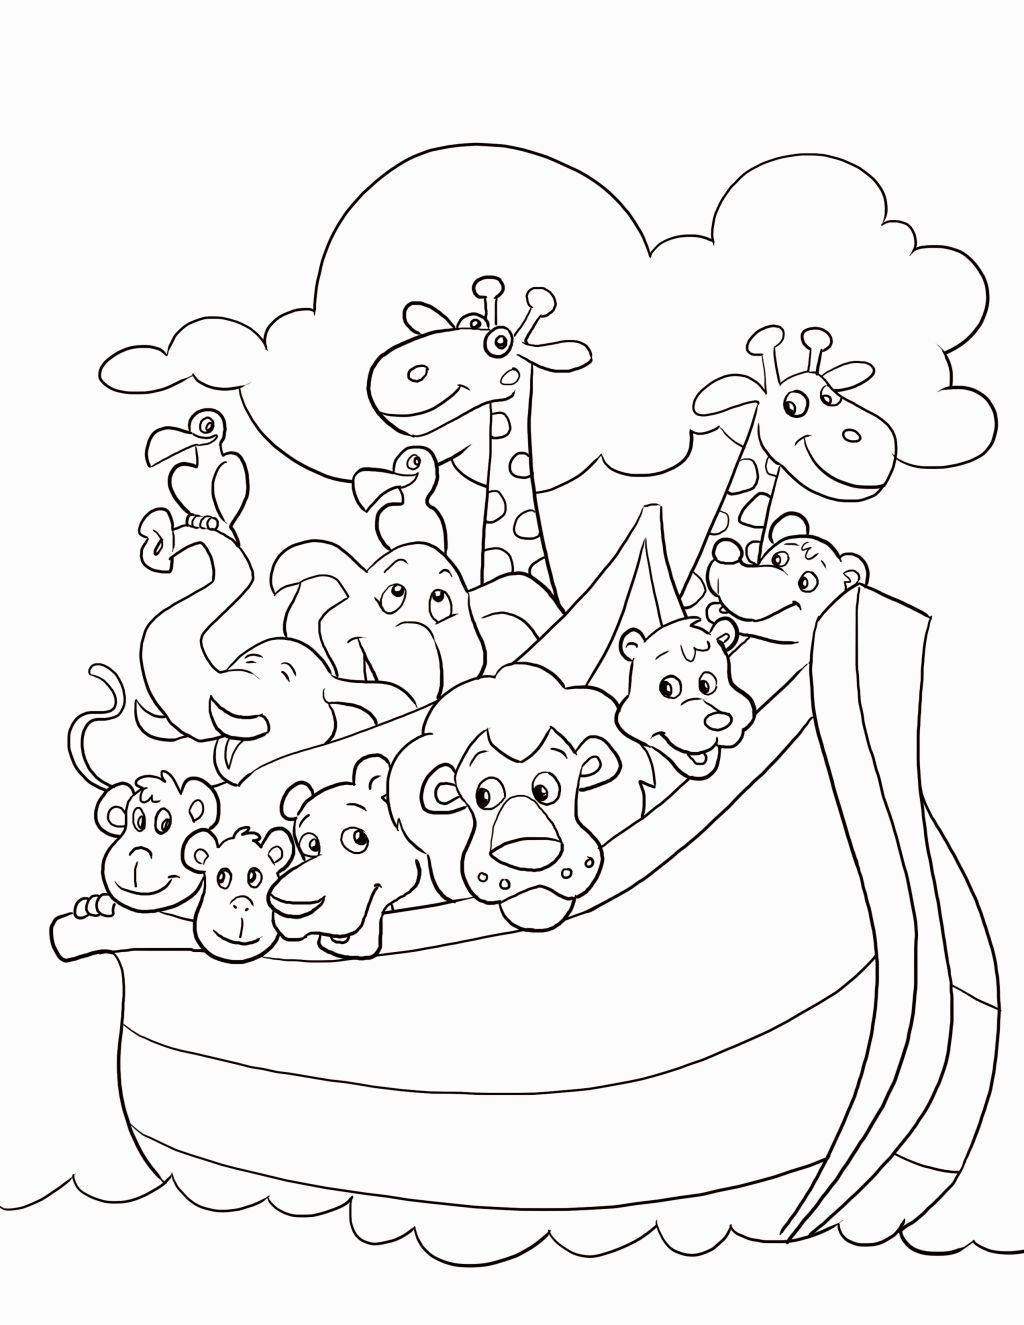 Religious Coloring Pages For Kids
 Christian Coloring Pages For Preschoolers